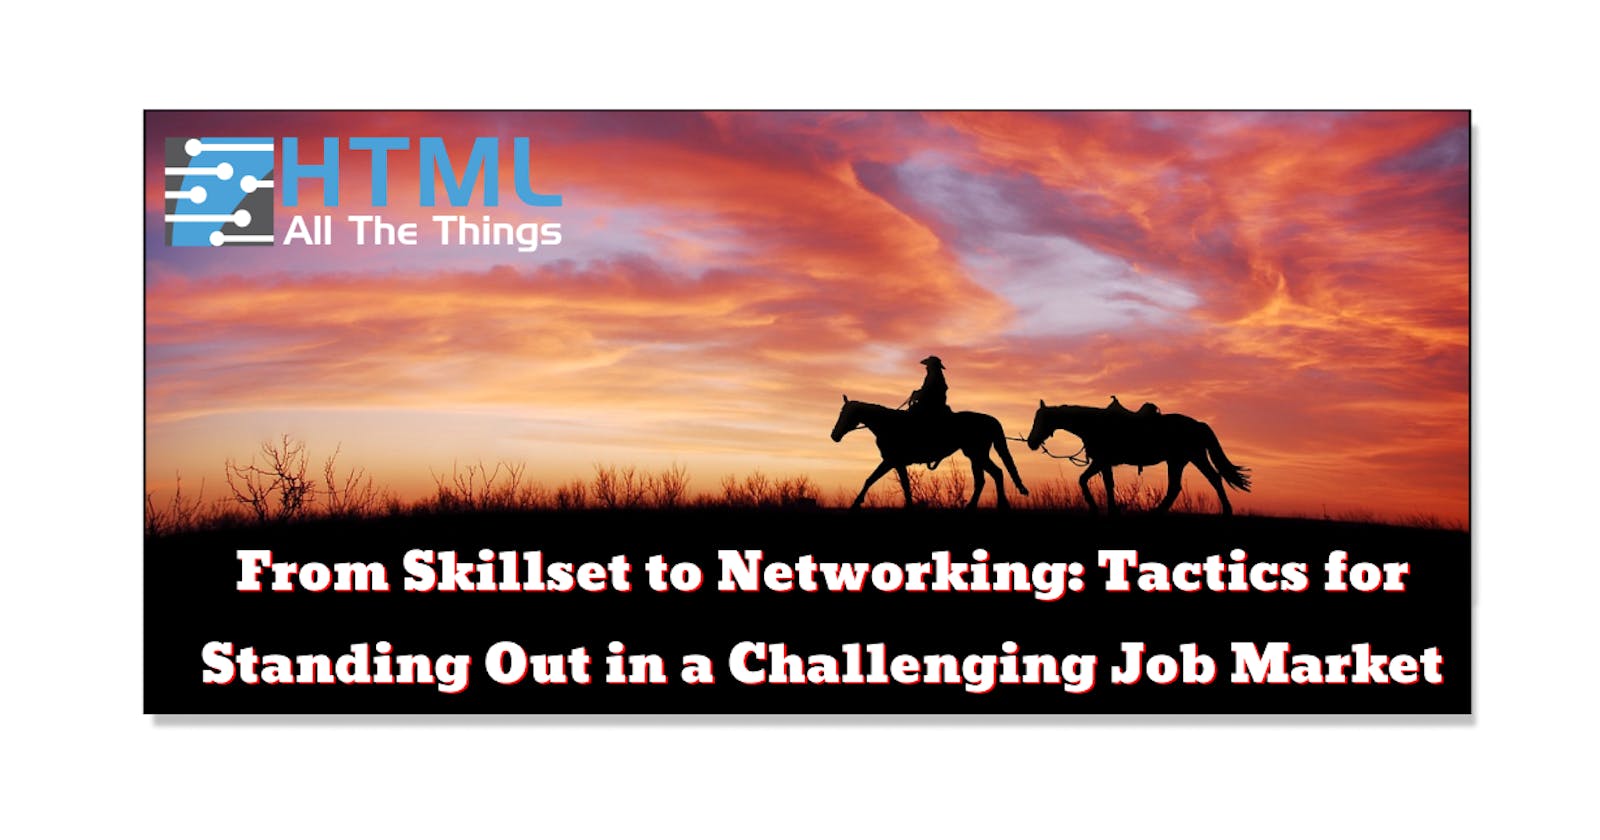 From Skillset to Networking: Tactics for Standing Out in a Challenging Job Market